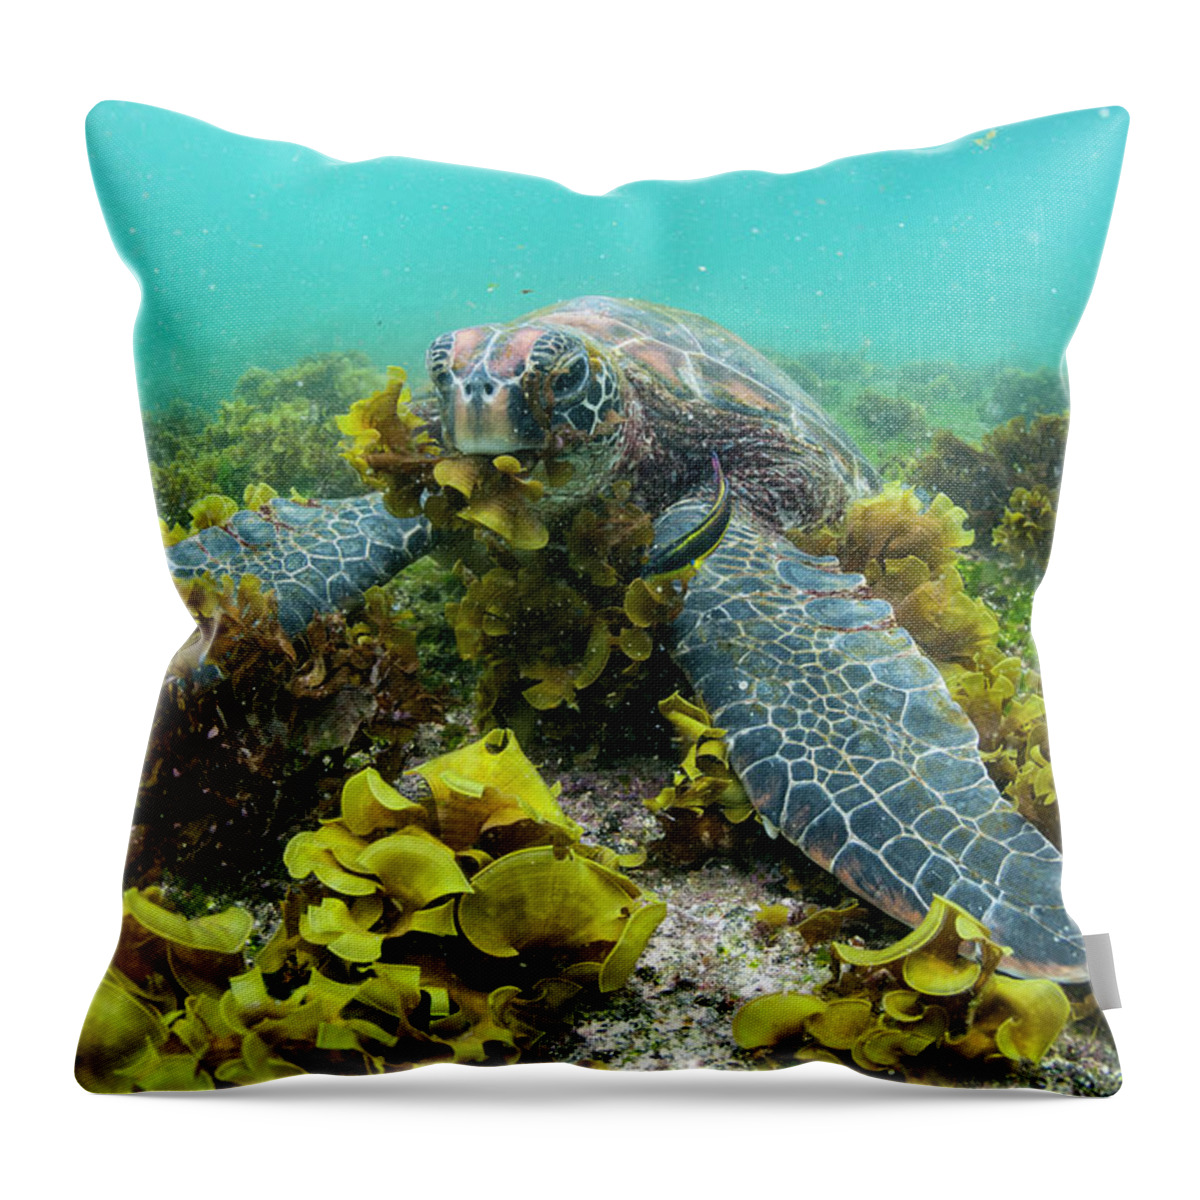 Animals Throw Pillow featuring the photograph Green Sea Turtle Eating Seaweed #1 by Tui De Roy